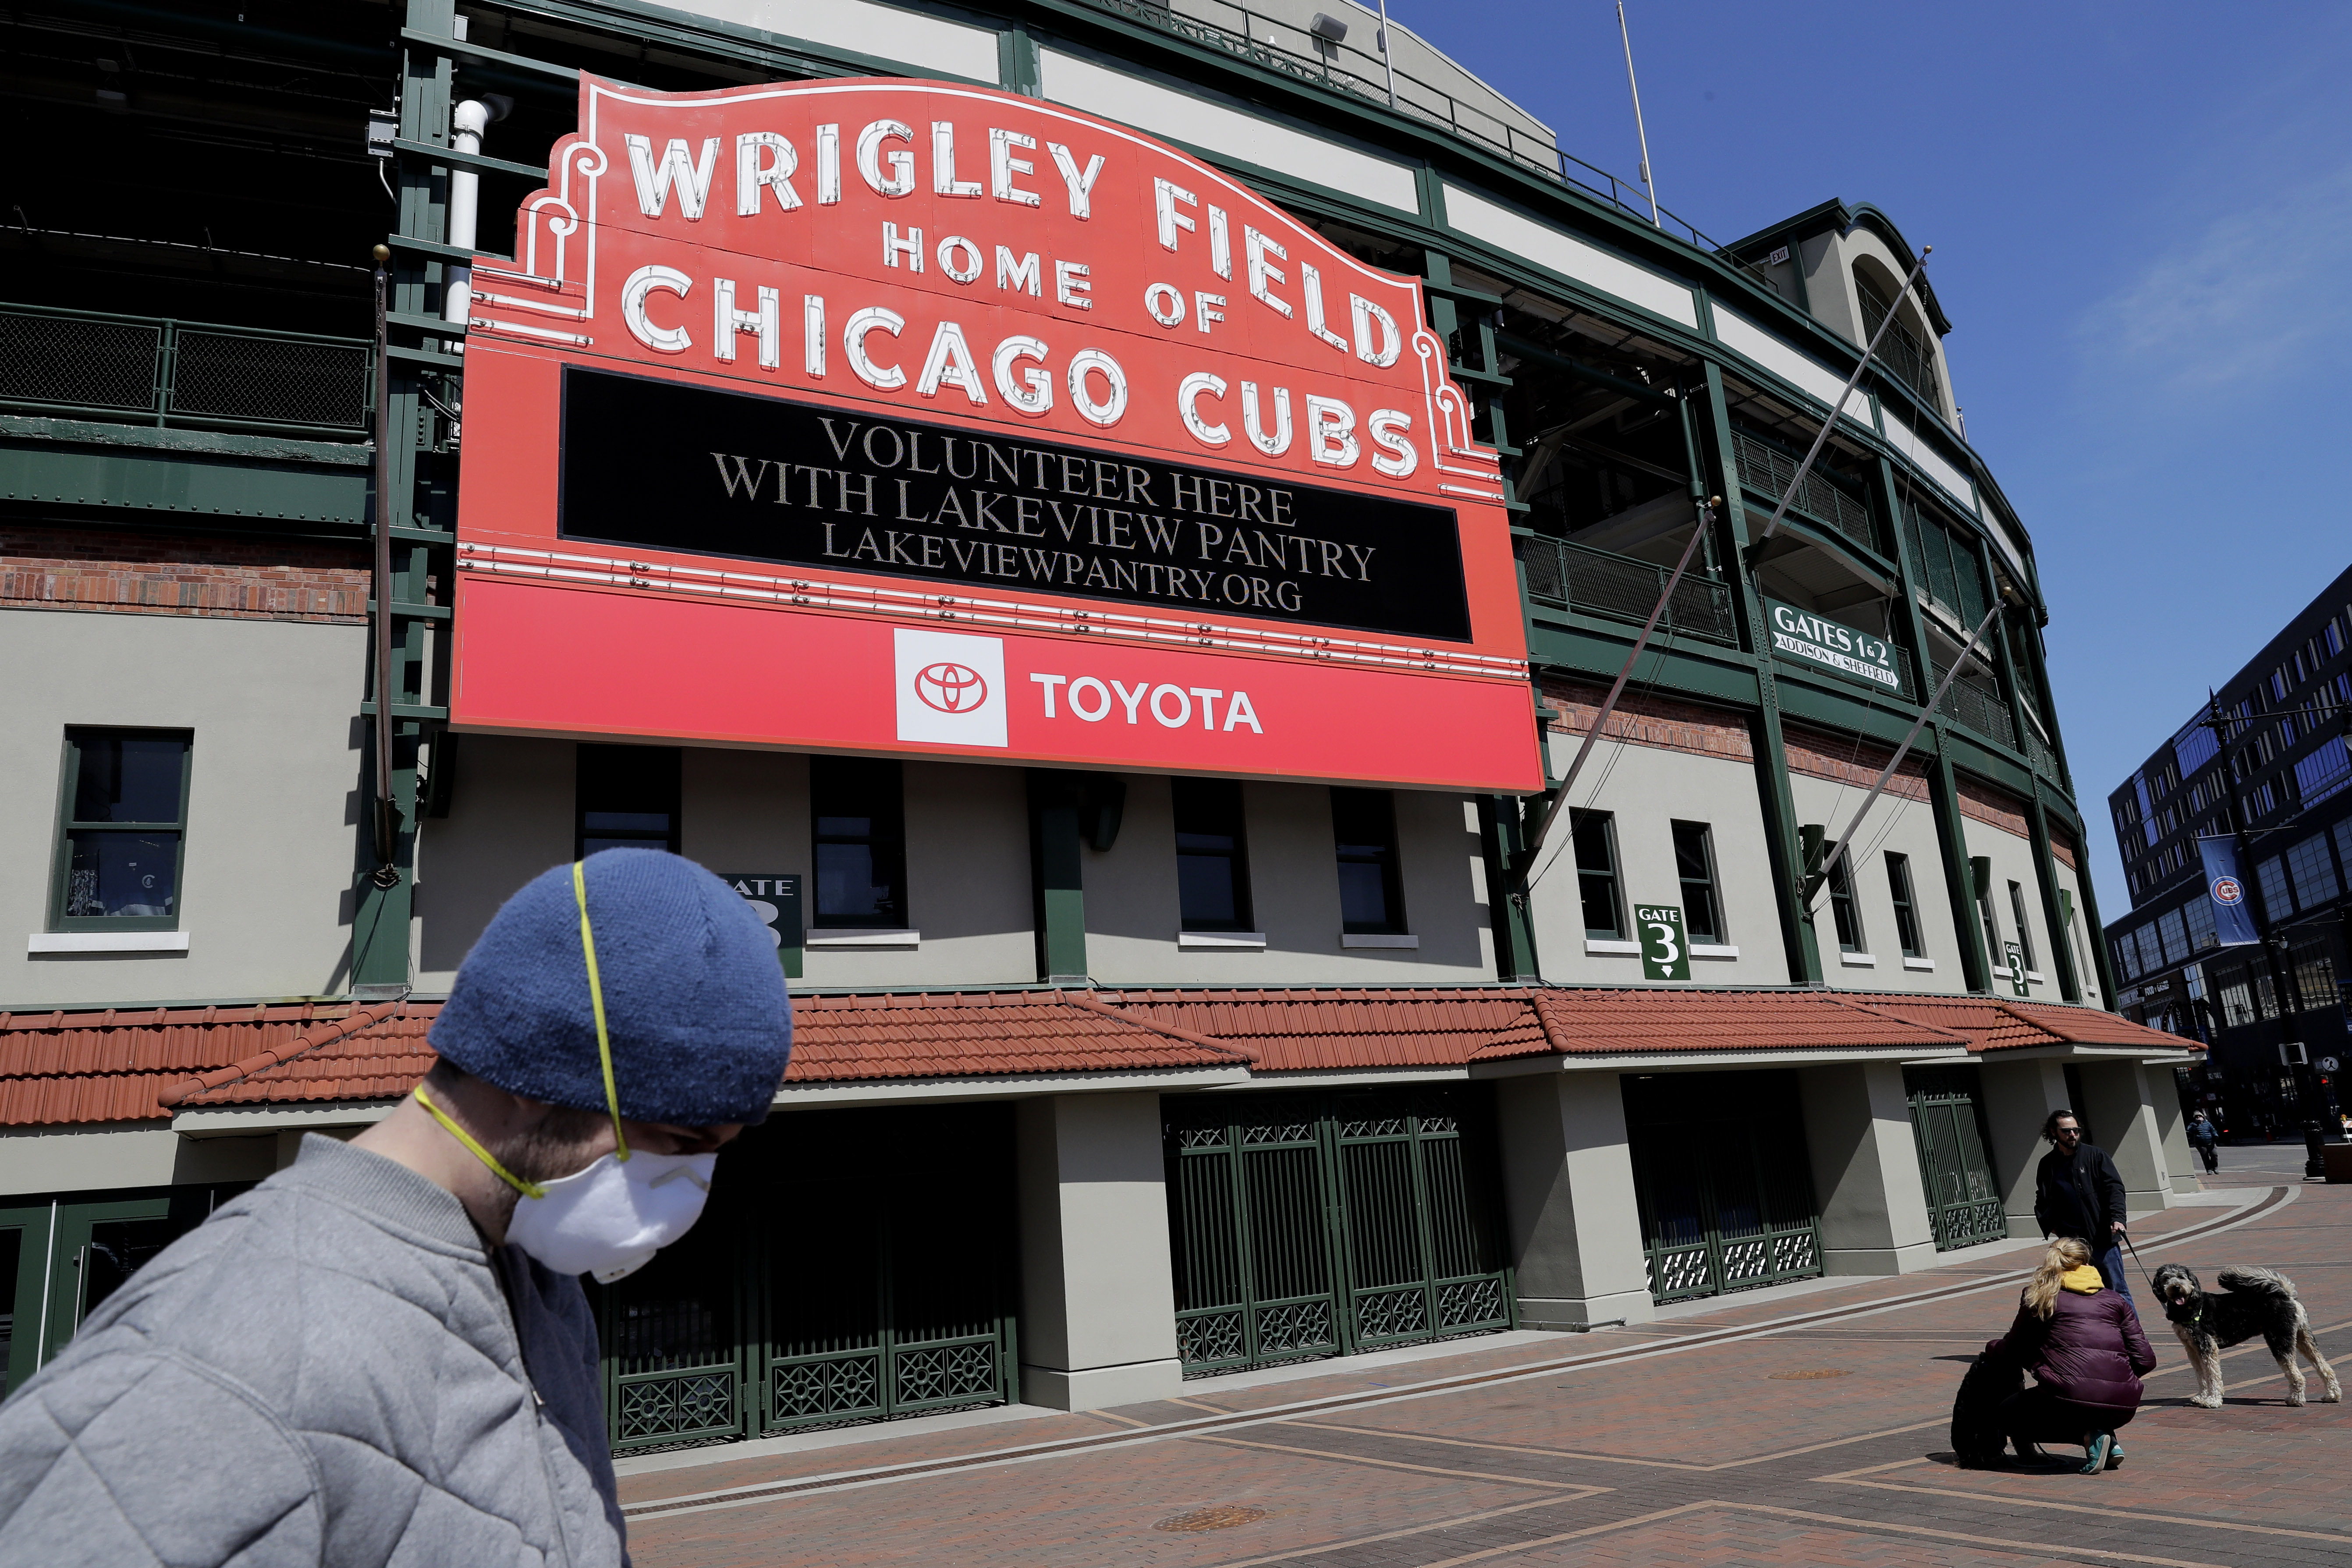 Chicago Cubs History: Photos of Early Days at Wrigley Field